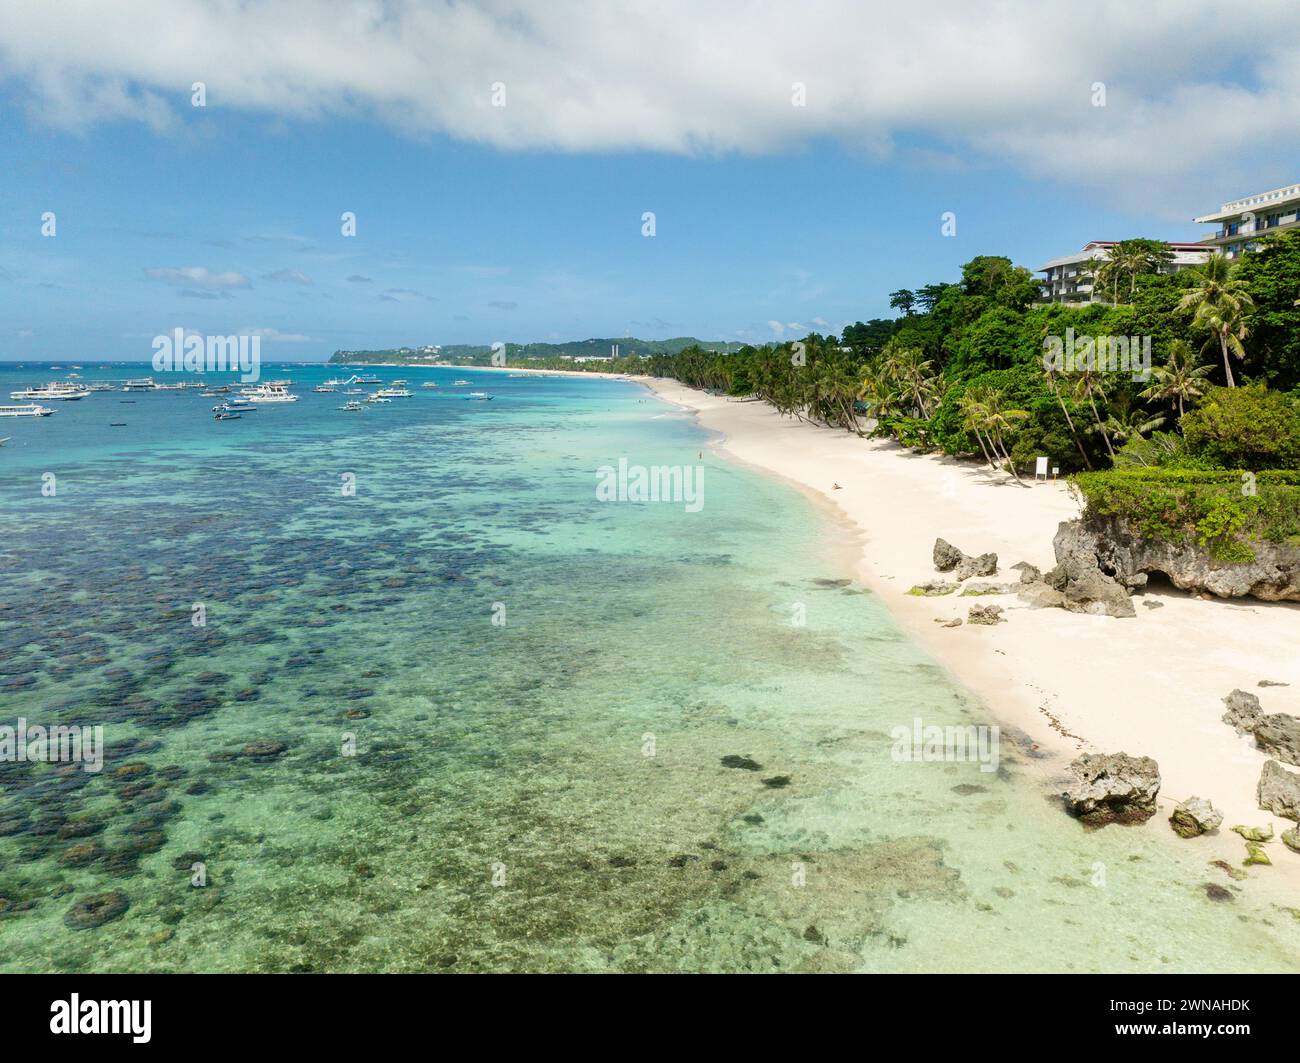 Clear turquoise water with tour boats and ocean waves on white sand beach. Boracay, Philippines. Stock Photo